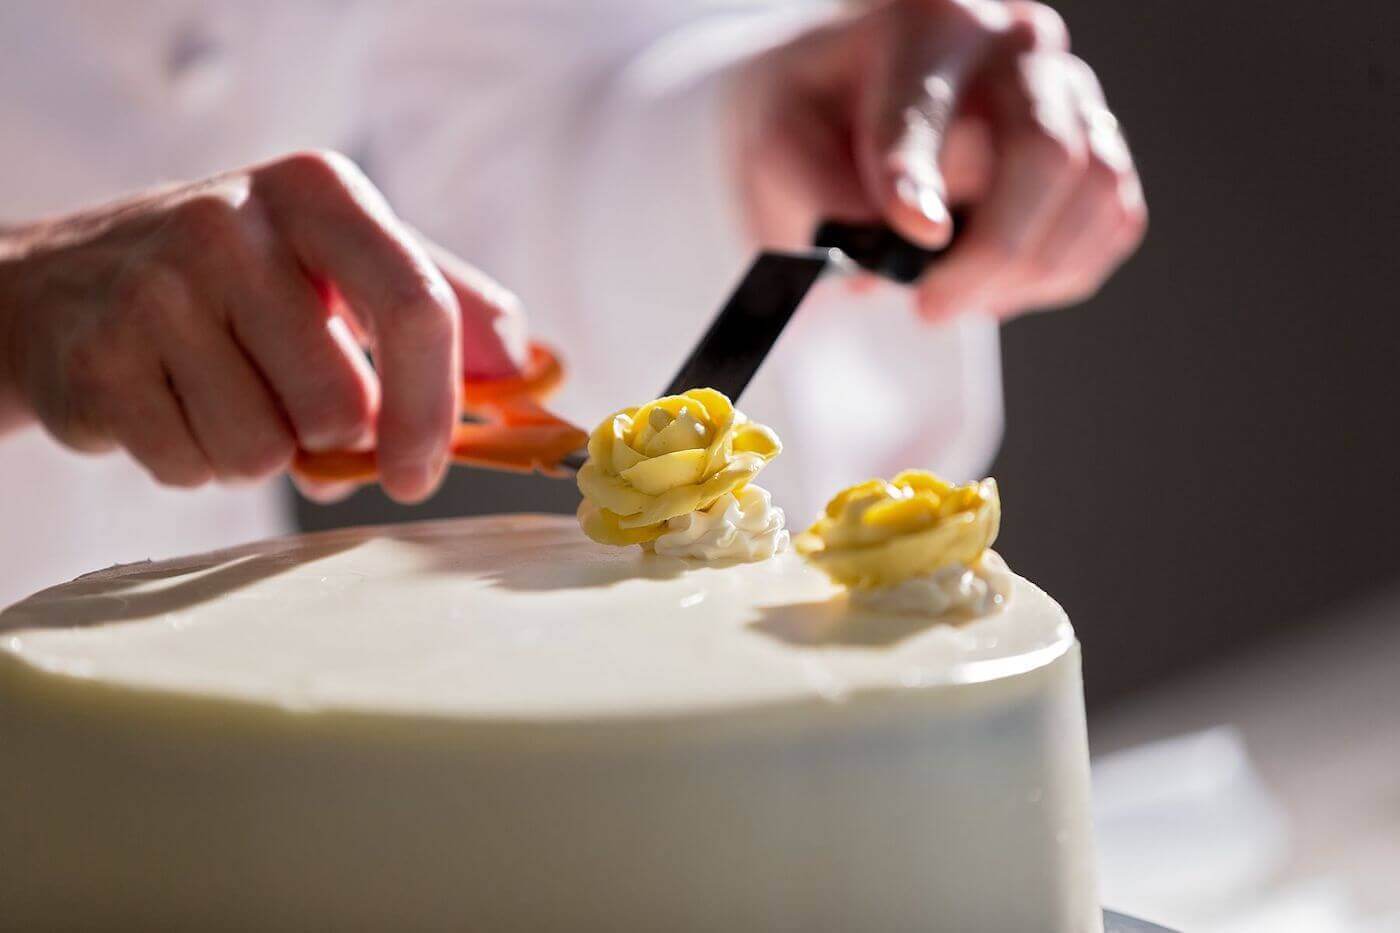 Cake Decorator Placing Yellow Roses On A Cake 1400 